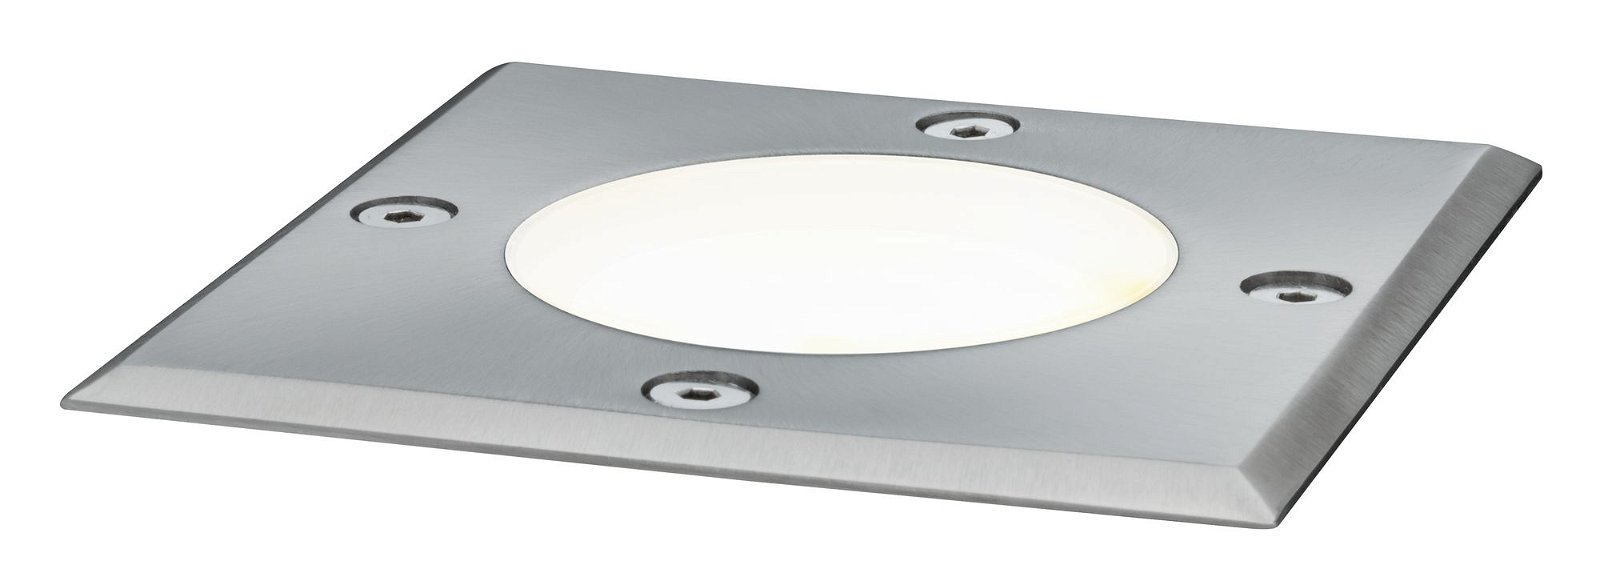 LED Wall Recessed Light Floor Recessed Rectangular Stainless Steel 230v Stage Light 